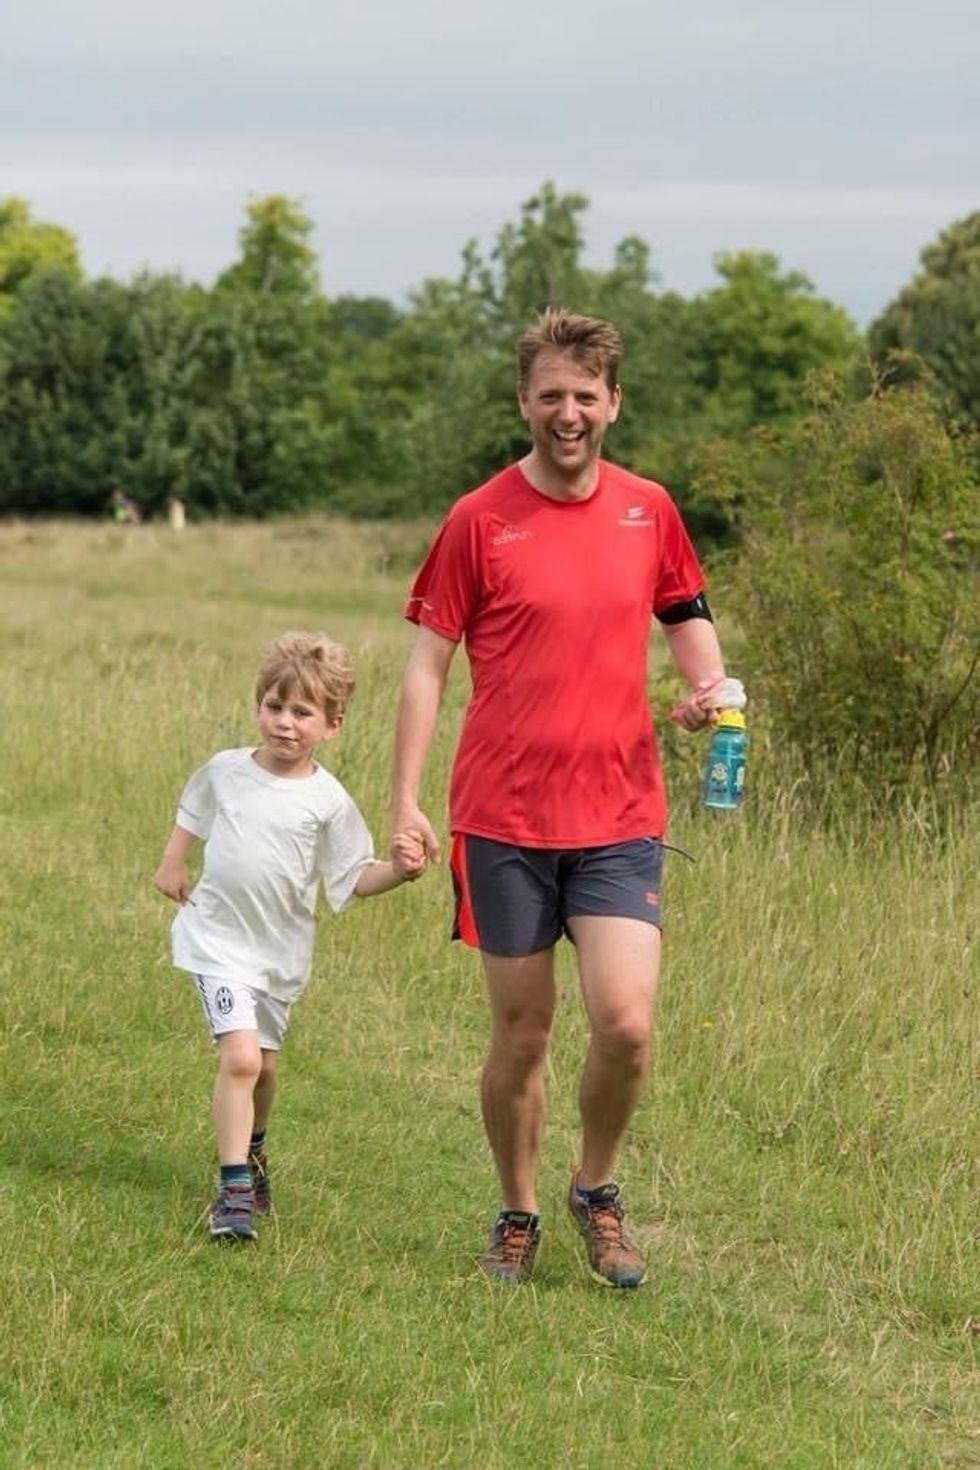 Wes Ball runs with his son William at a weekly Parkrun event in Buckinghamshire. (Wes Ball/PA)